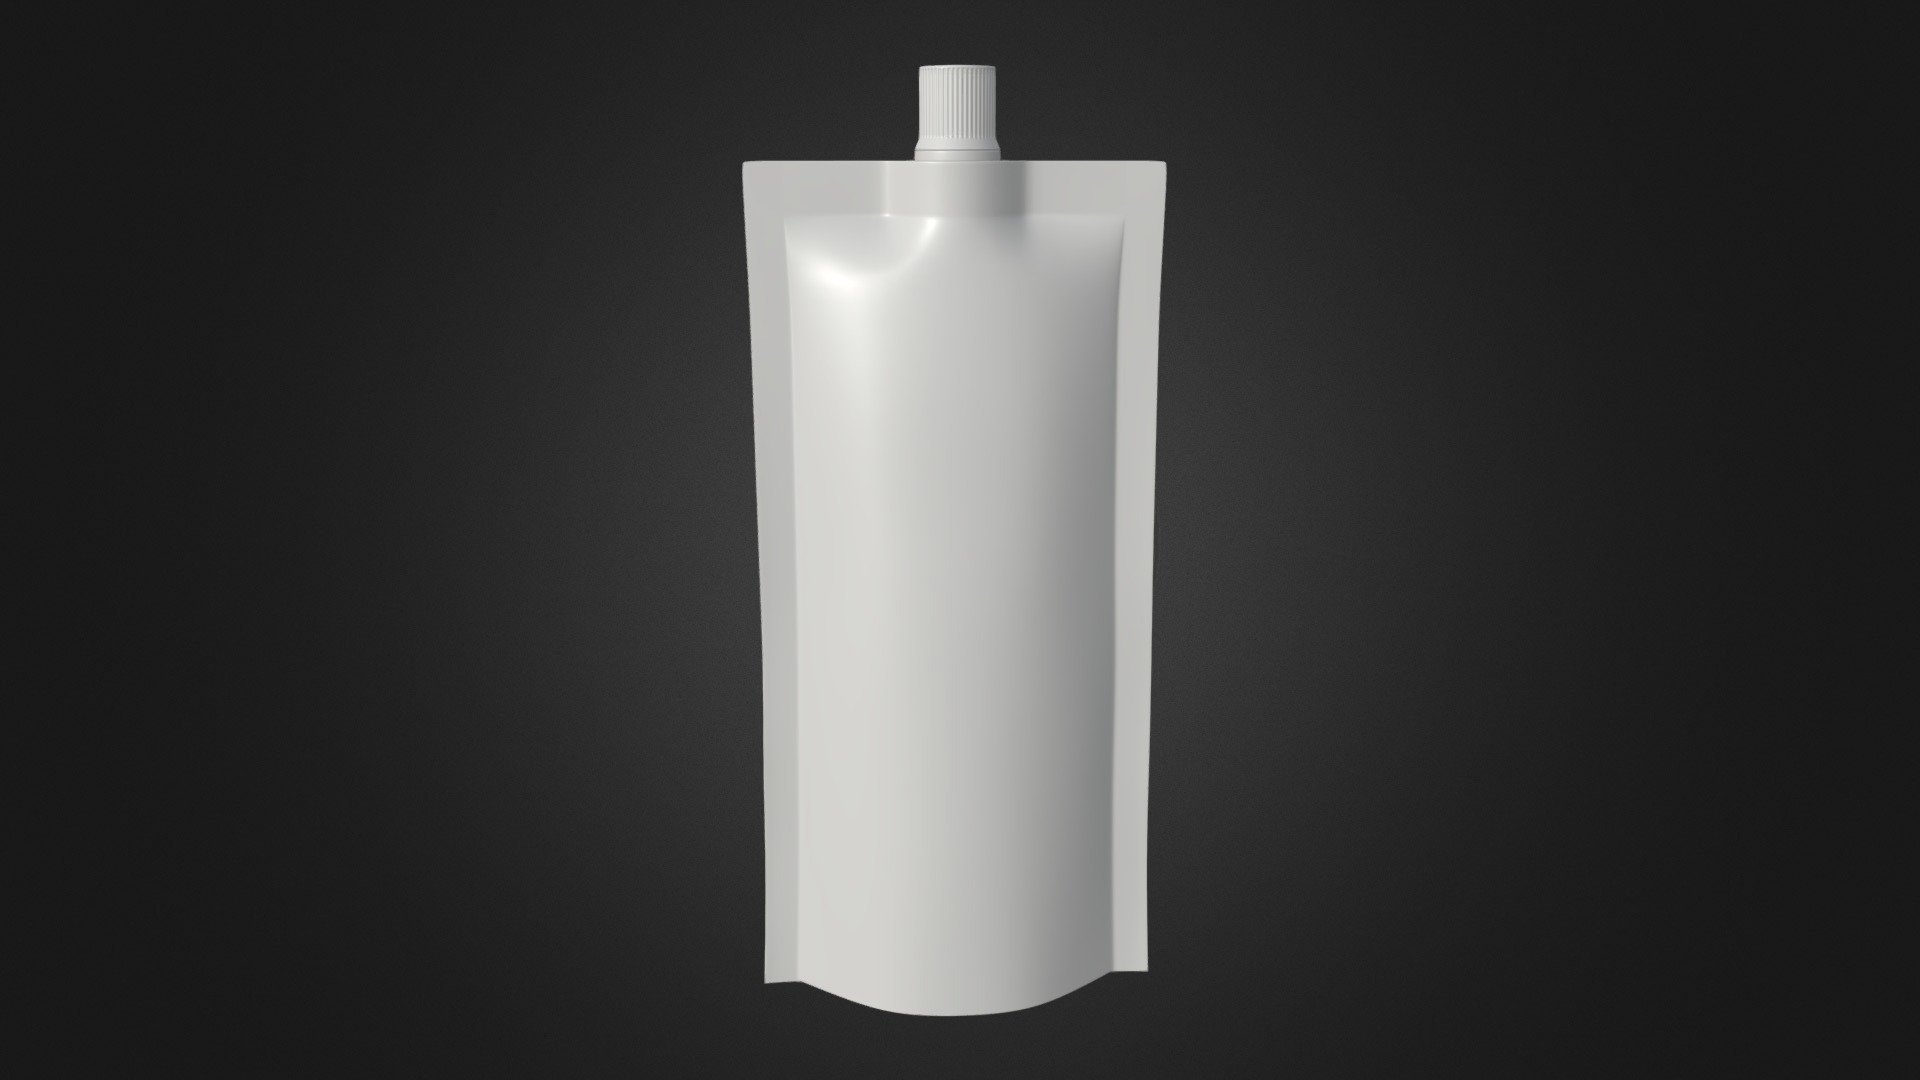 3D model pouch bag 11 - This is a 3D model of the pouch bag 11. The 3D model is about a white bottle with a black background.